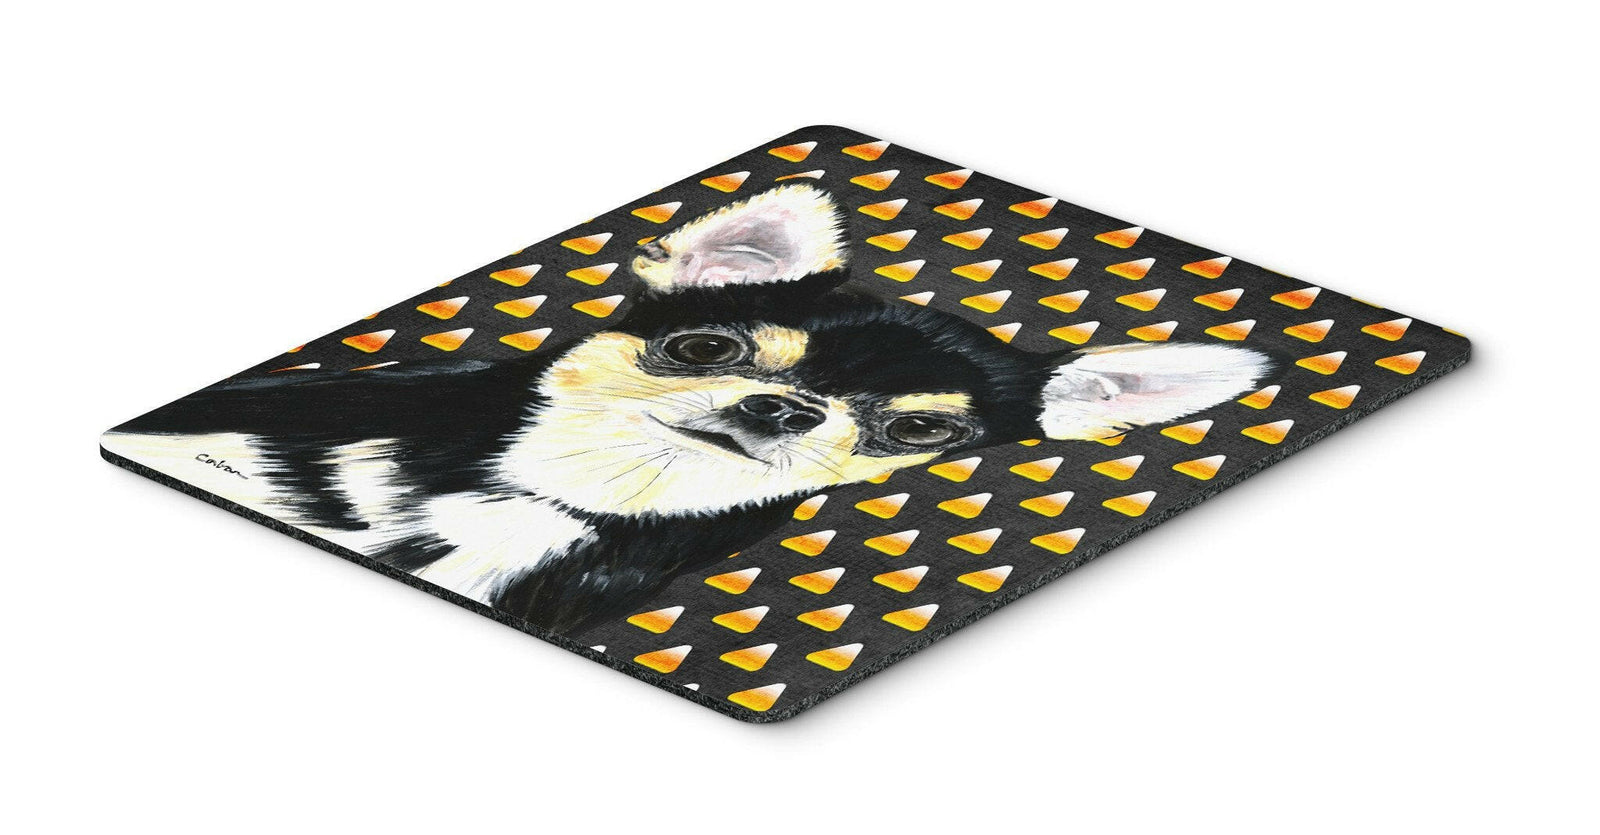 Chihuahua Candy Corn Halloween Portrait Mouse Pad, Hot Pad or Trivet by Caroline's Treasures